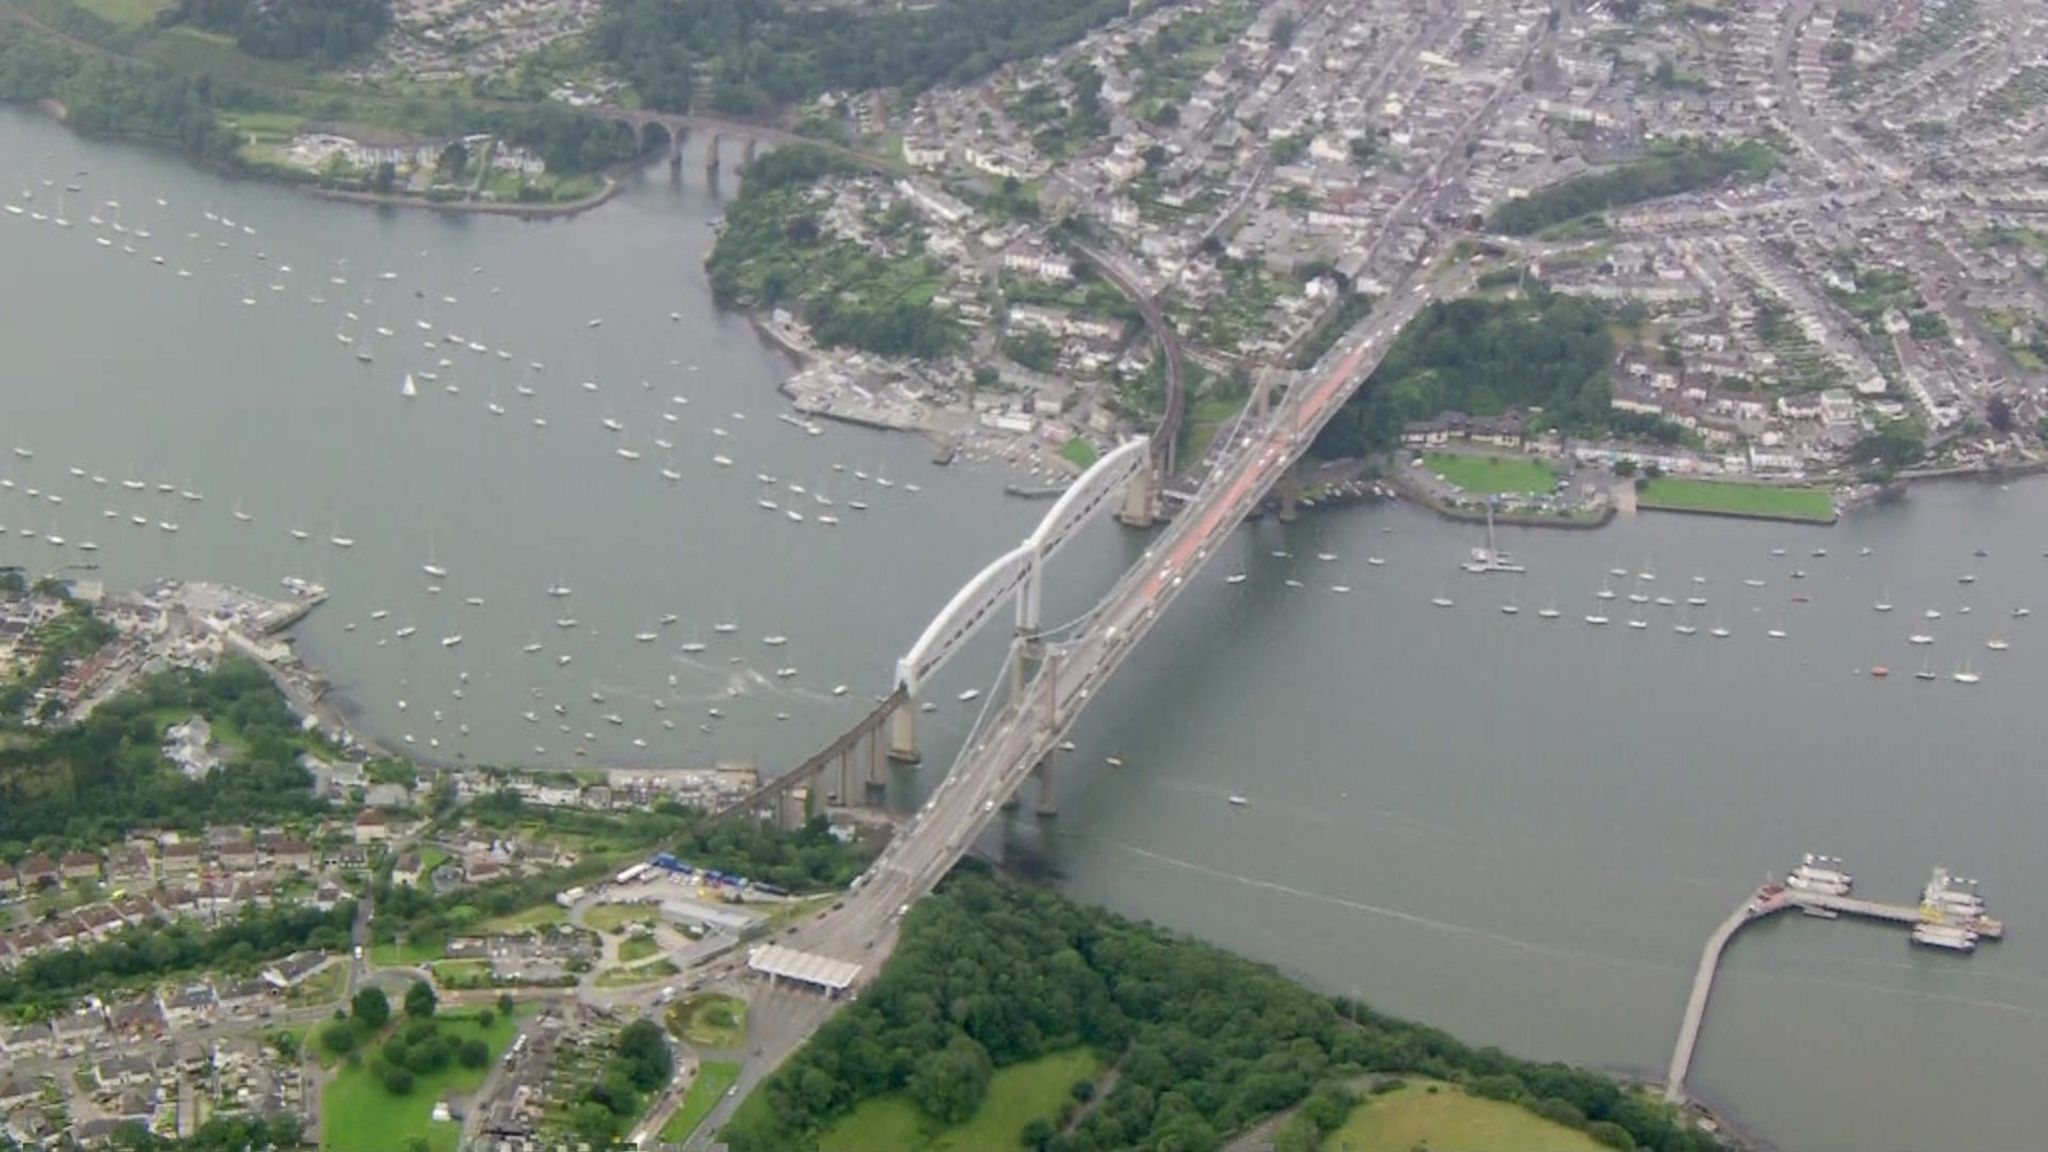 A photo of the Tamar